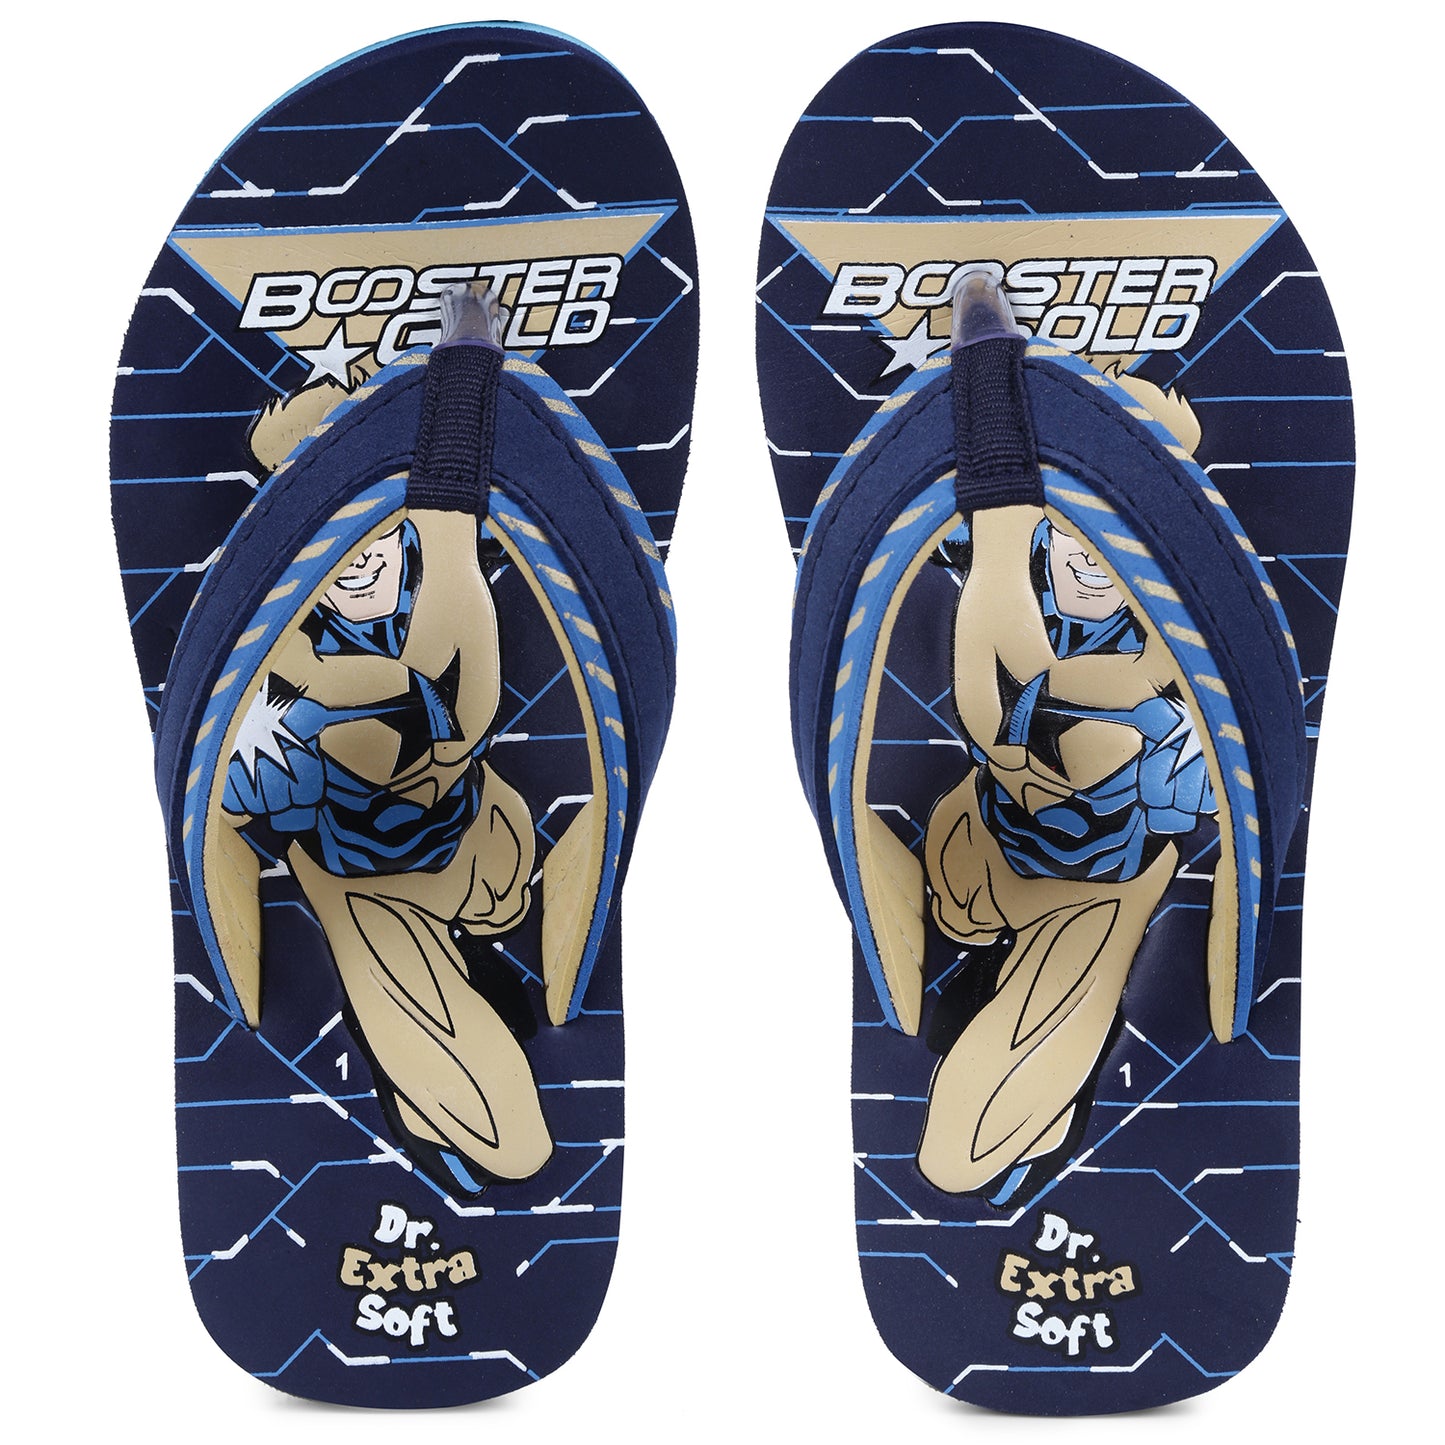 DOCTOR EXTRA SOFT Unisex-Child Kids Flip-Flop (Booster Gold Print) Soft Comfortable Indoor & Outdoor Slippers Stylish Non-Slip Slide Home Casual Cool Cartoon Cute House Chappals For Boys & Girls